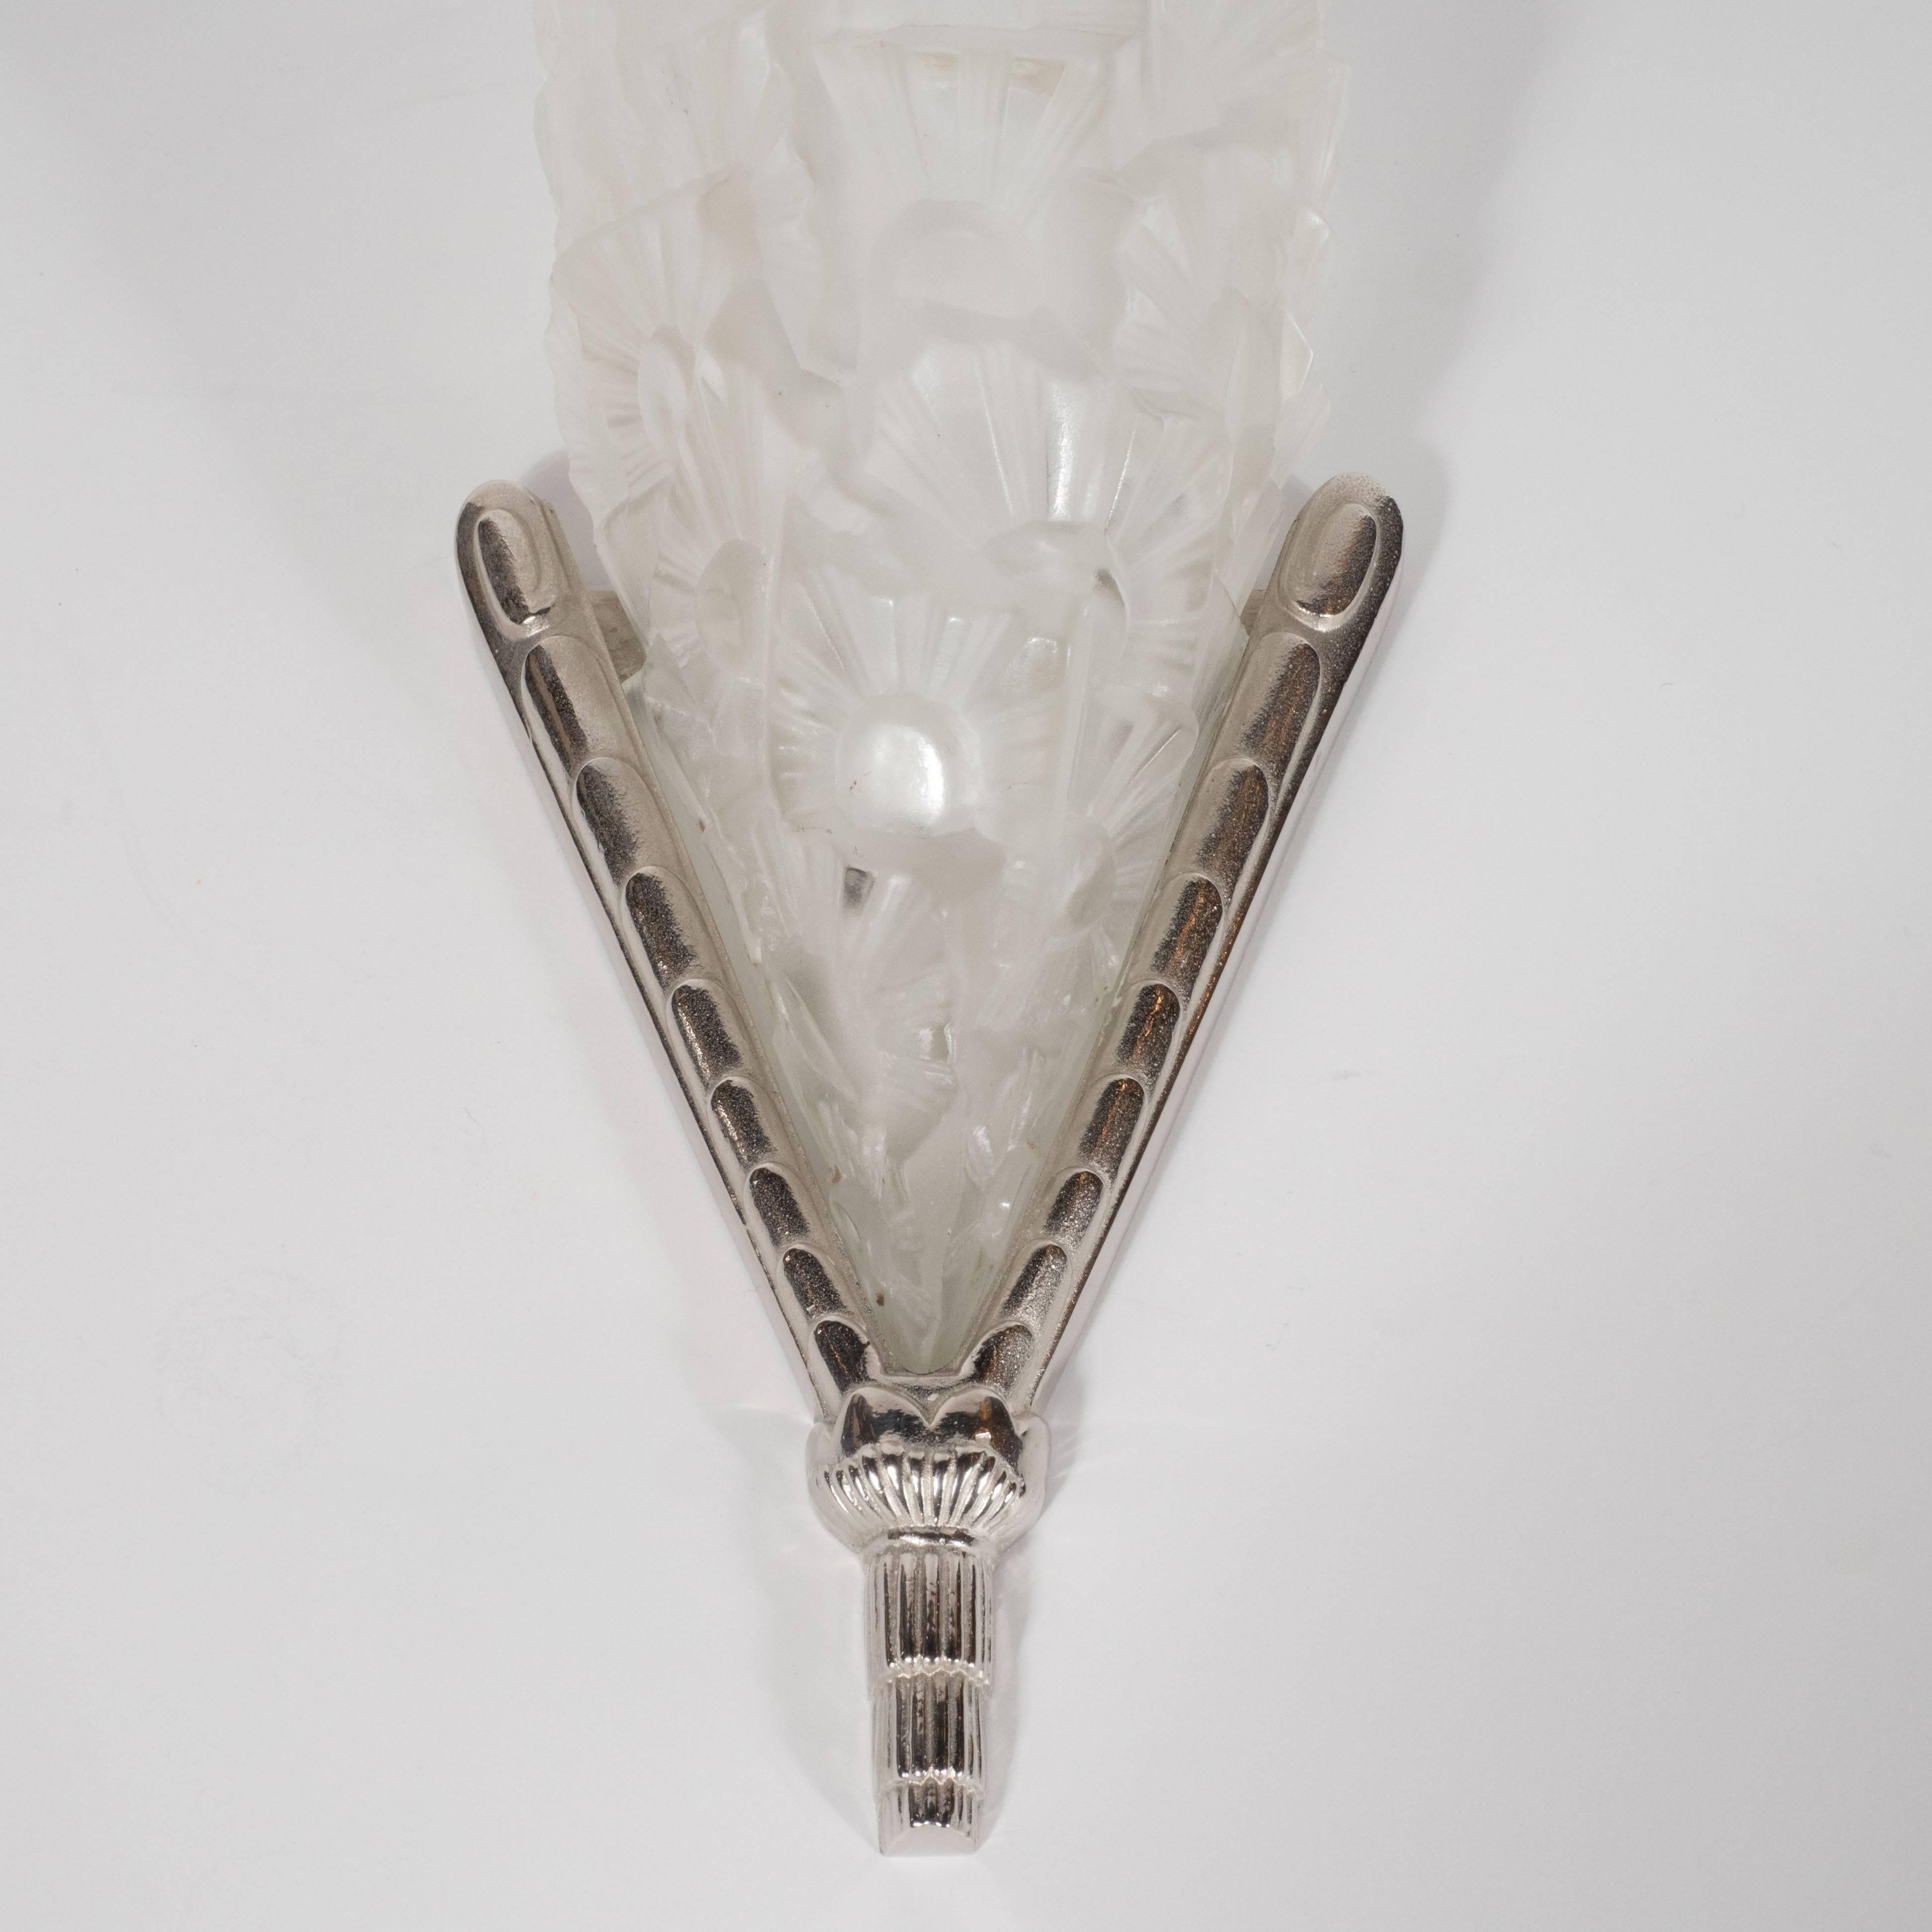 This stunning pair of sconces were produced by Degué, arguably the most illustrious glass making studio in France during this period, circa 1930. The fan style shades feature an abundance of raised, overlapping cubist forms that capture the dynamic